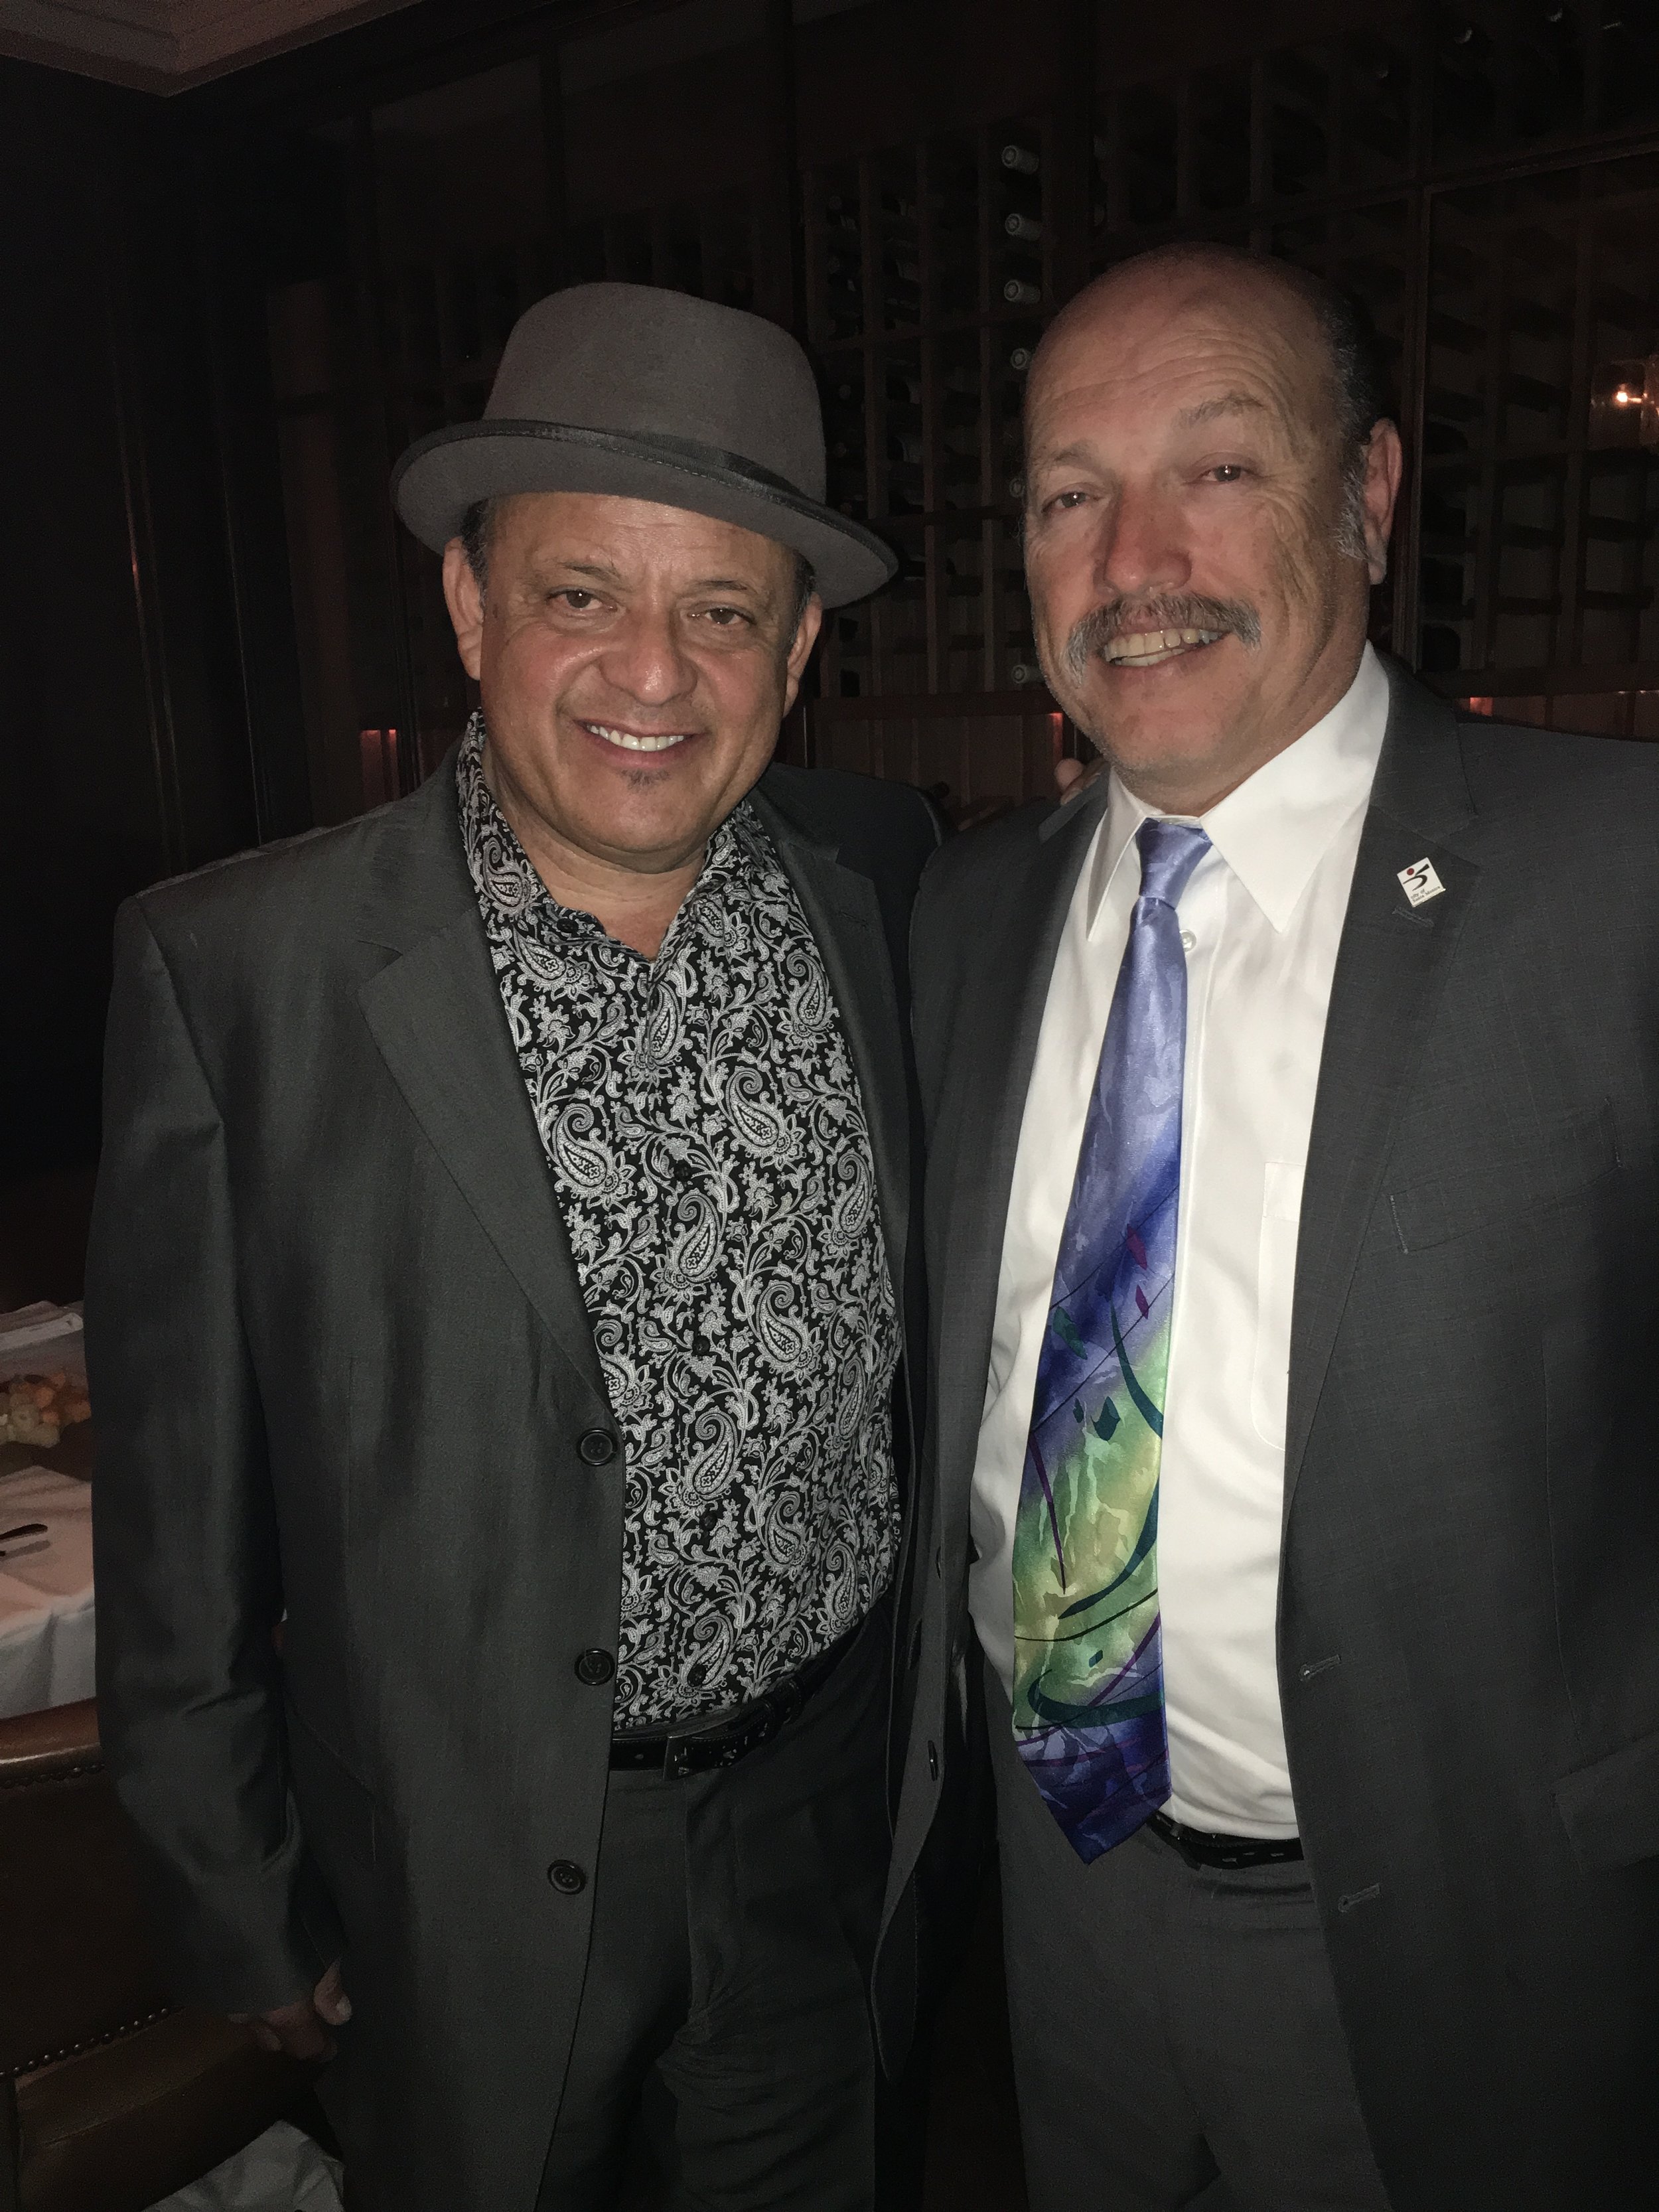 Tony with comedian Paul Rodriguez